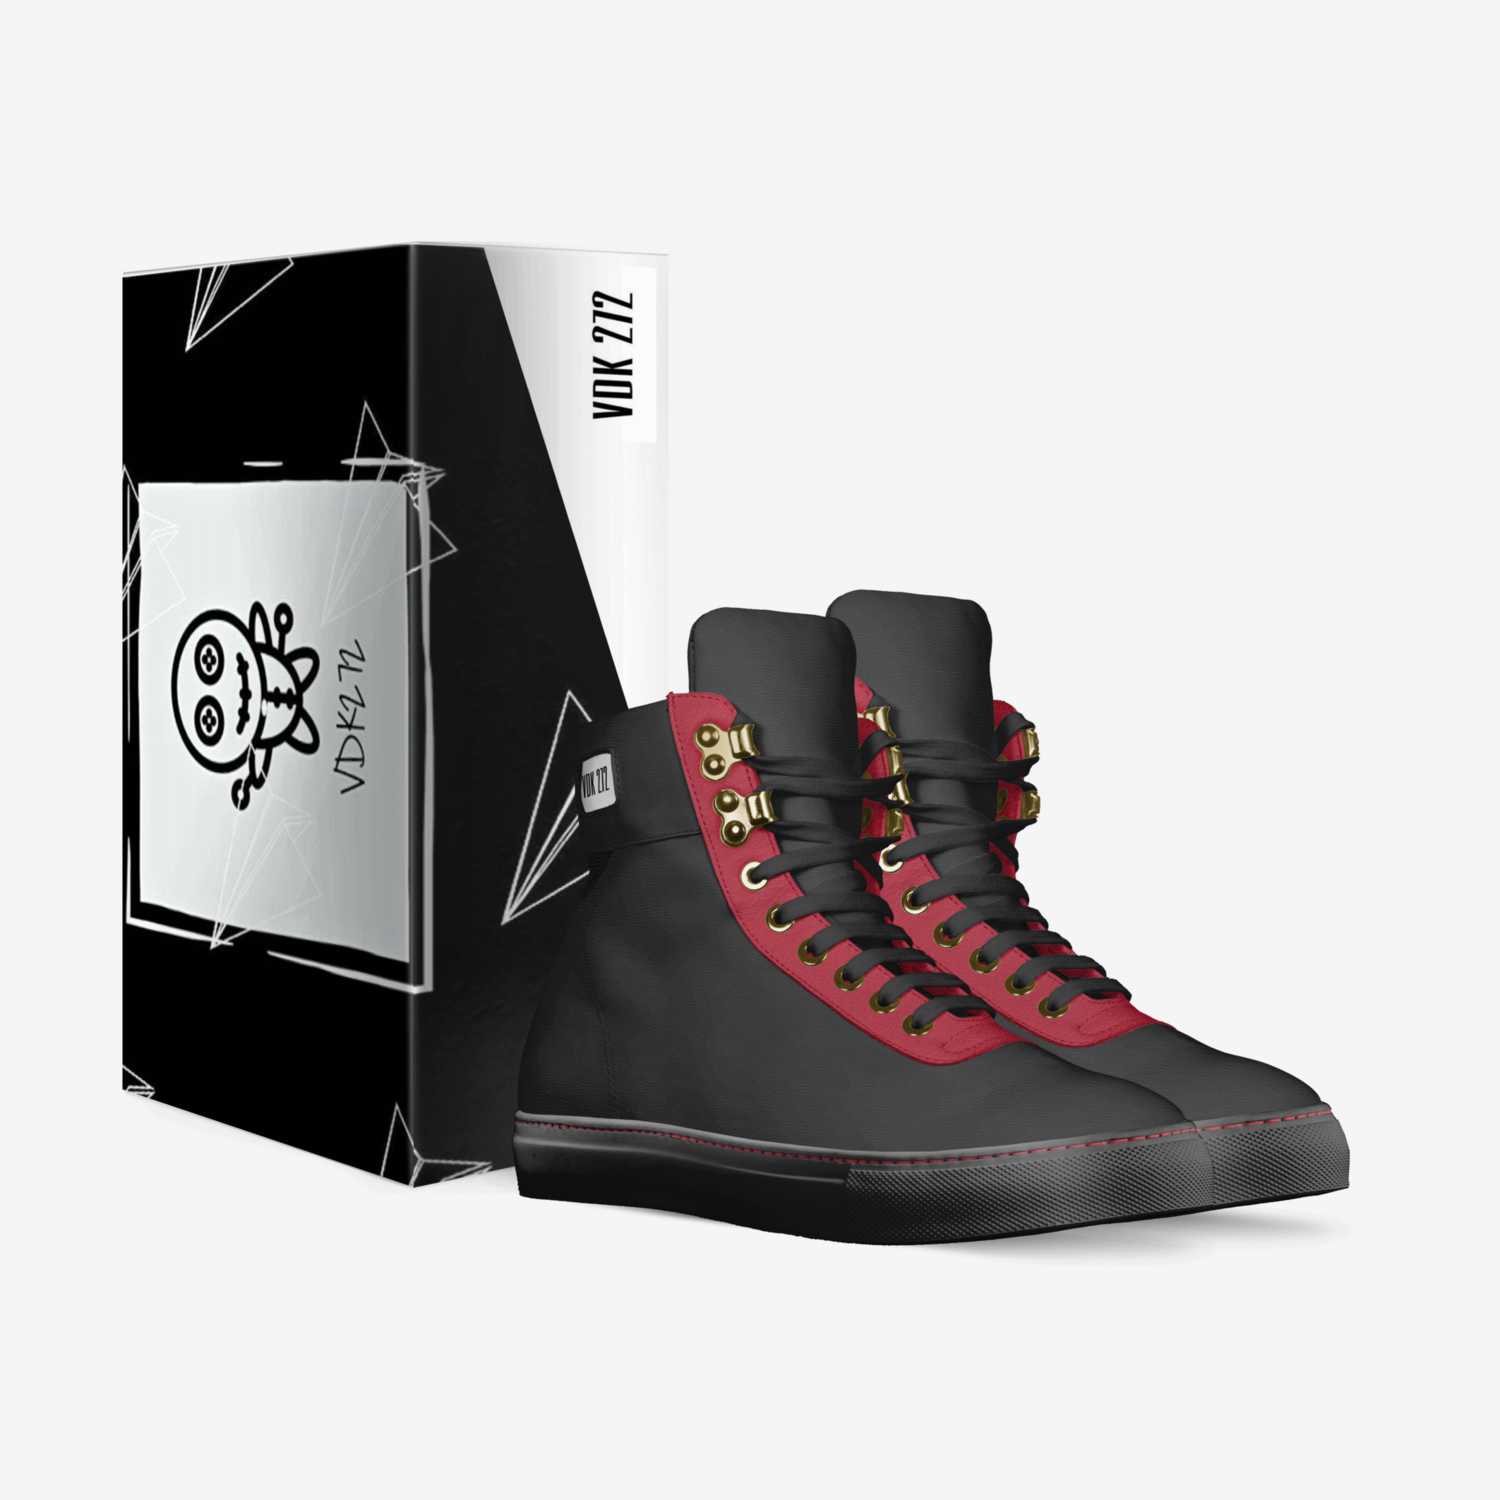 Vdk272 custom made in Italy shoes by Cyron James | Box view